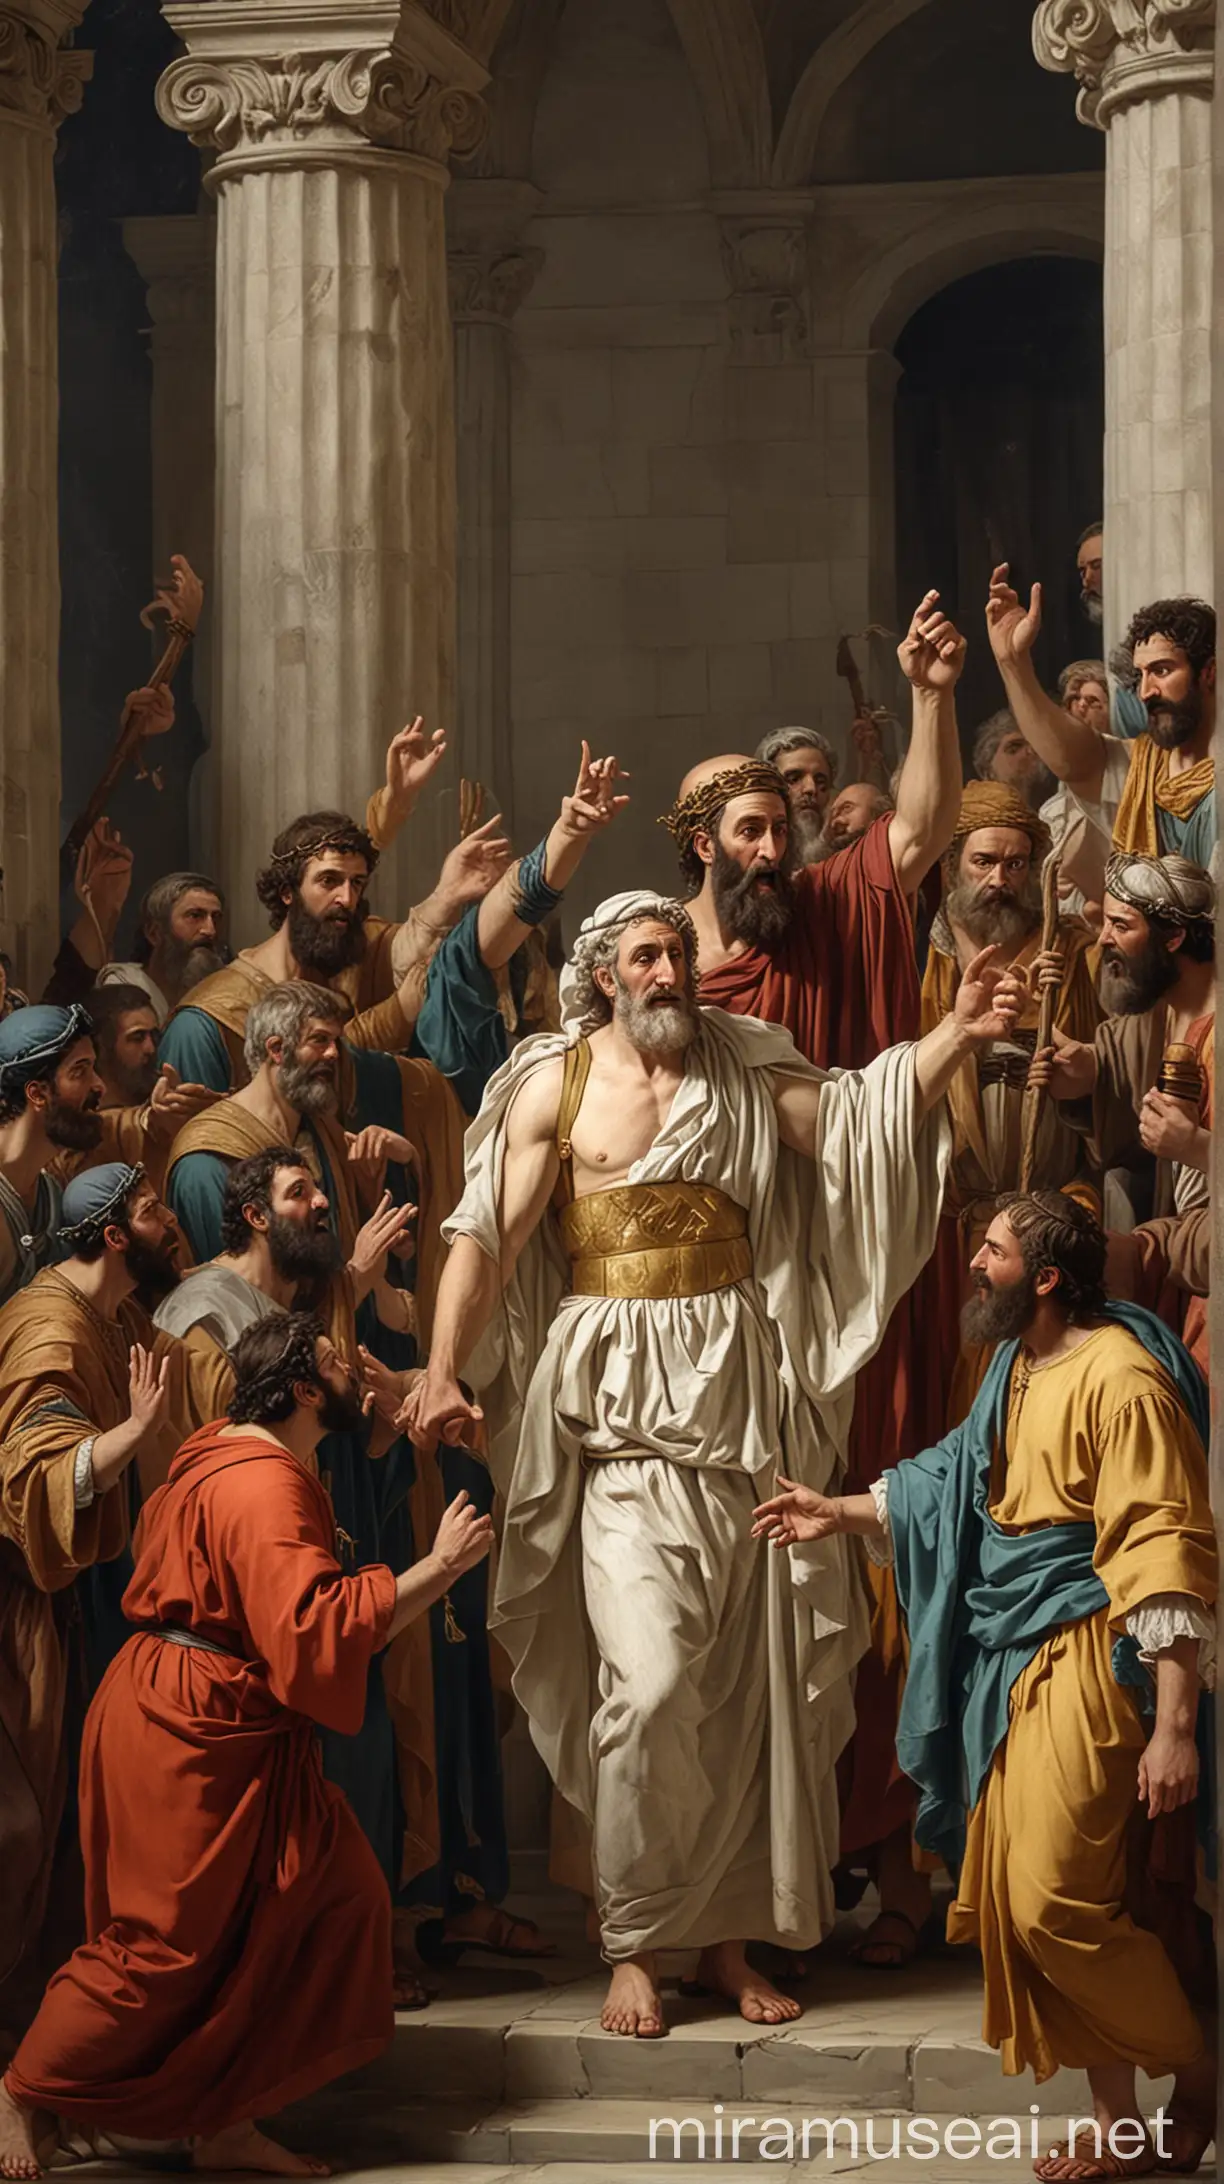 Create an image illustrating Paul being brought before Gallio by Sosthenes and other synagogue leaders, accusing him of religious misconduct in ancient world 